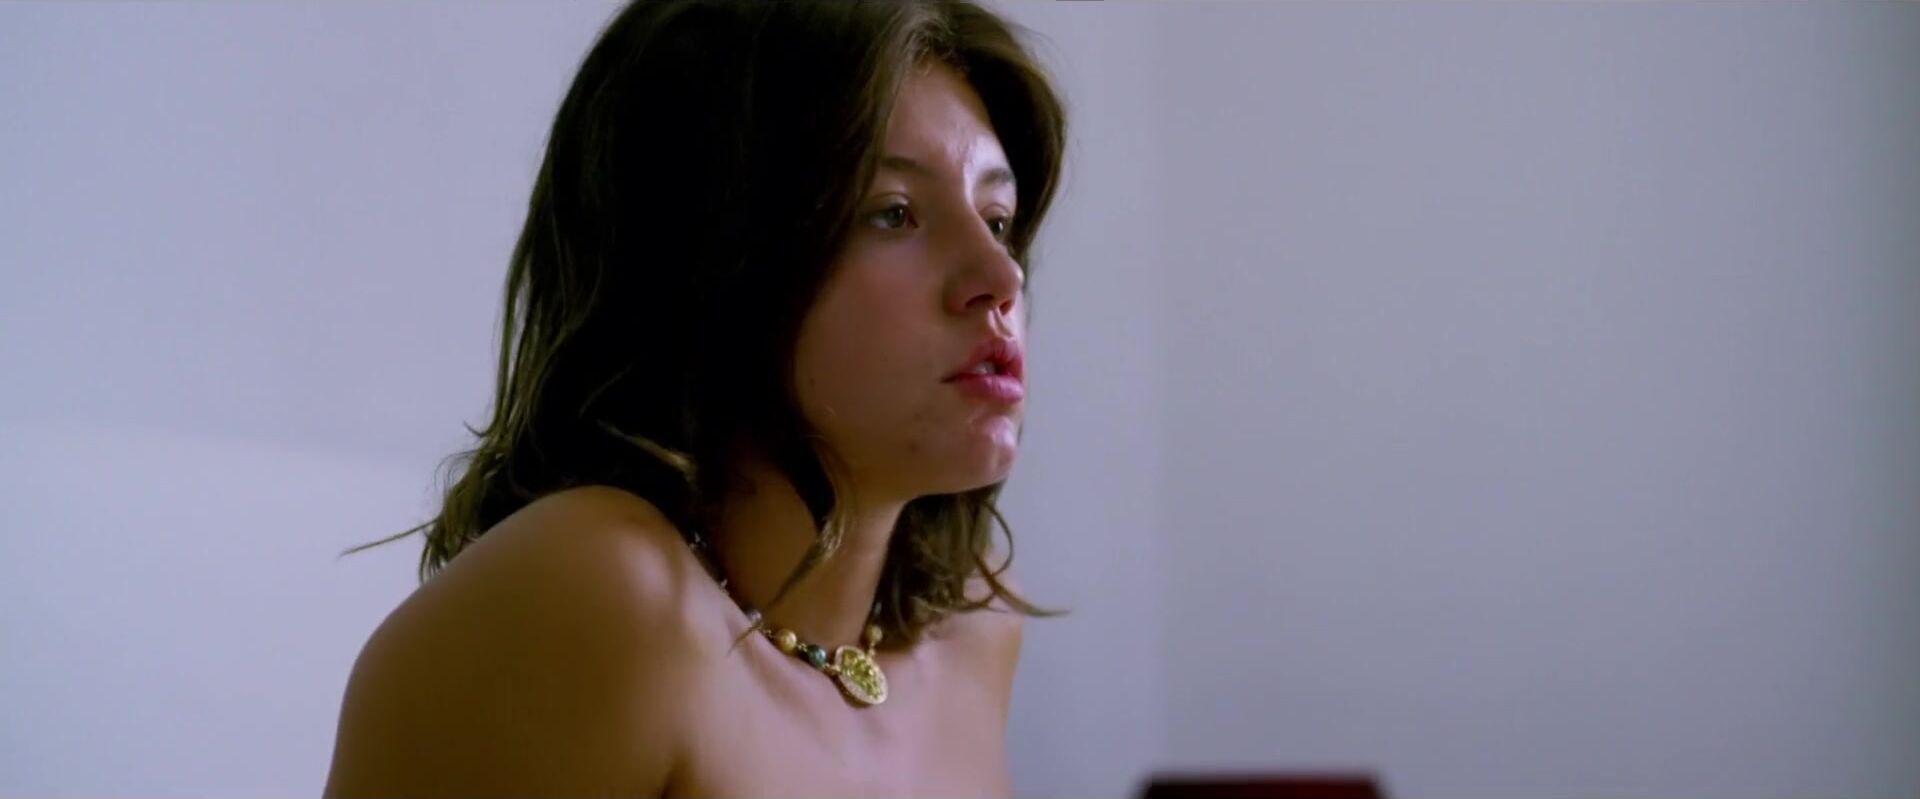 Masturbacion Adele Exarchopoulos and other French girls naked fool around in Orpheline (2016) Buttfucking - 2